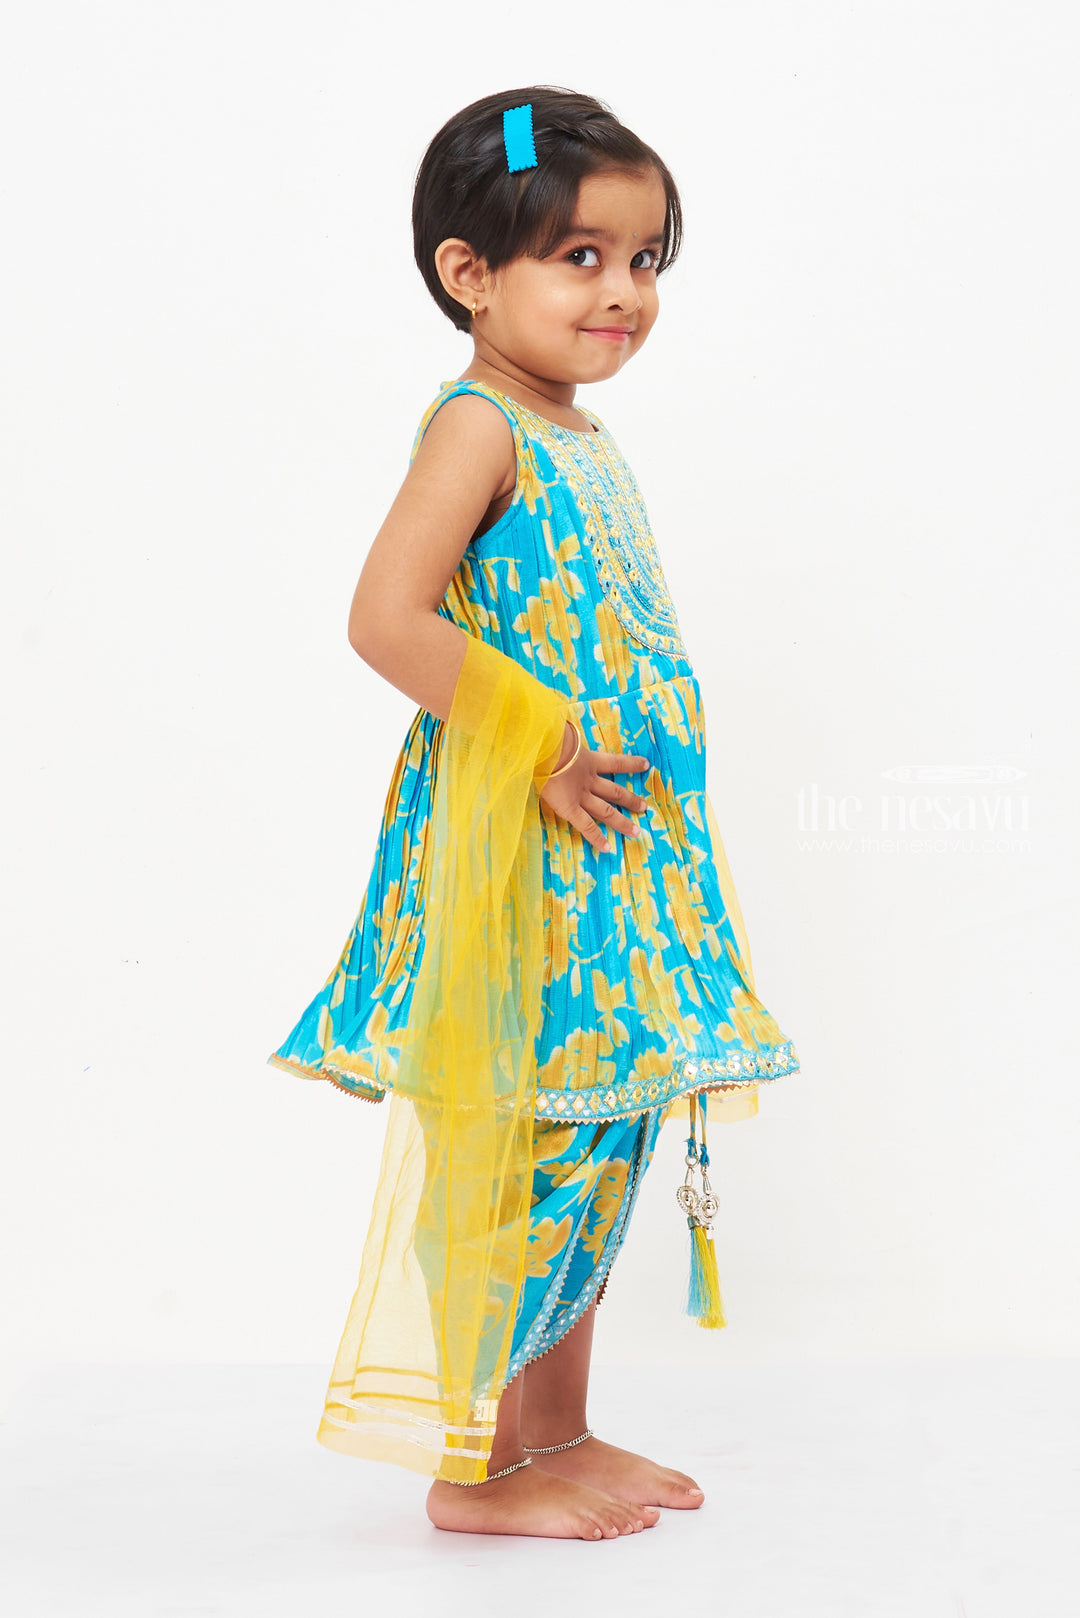 The Nesavu Girls Dothi Sets Girls Sunshine Blue Kurti with Dhoti Pant Set - Vibrant and Versatile Nesavu Shop Girls Blue Floral Kurti & Dhoti Pant Set | Perfect Outfit for All Occasions